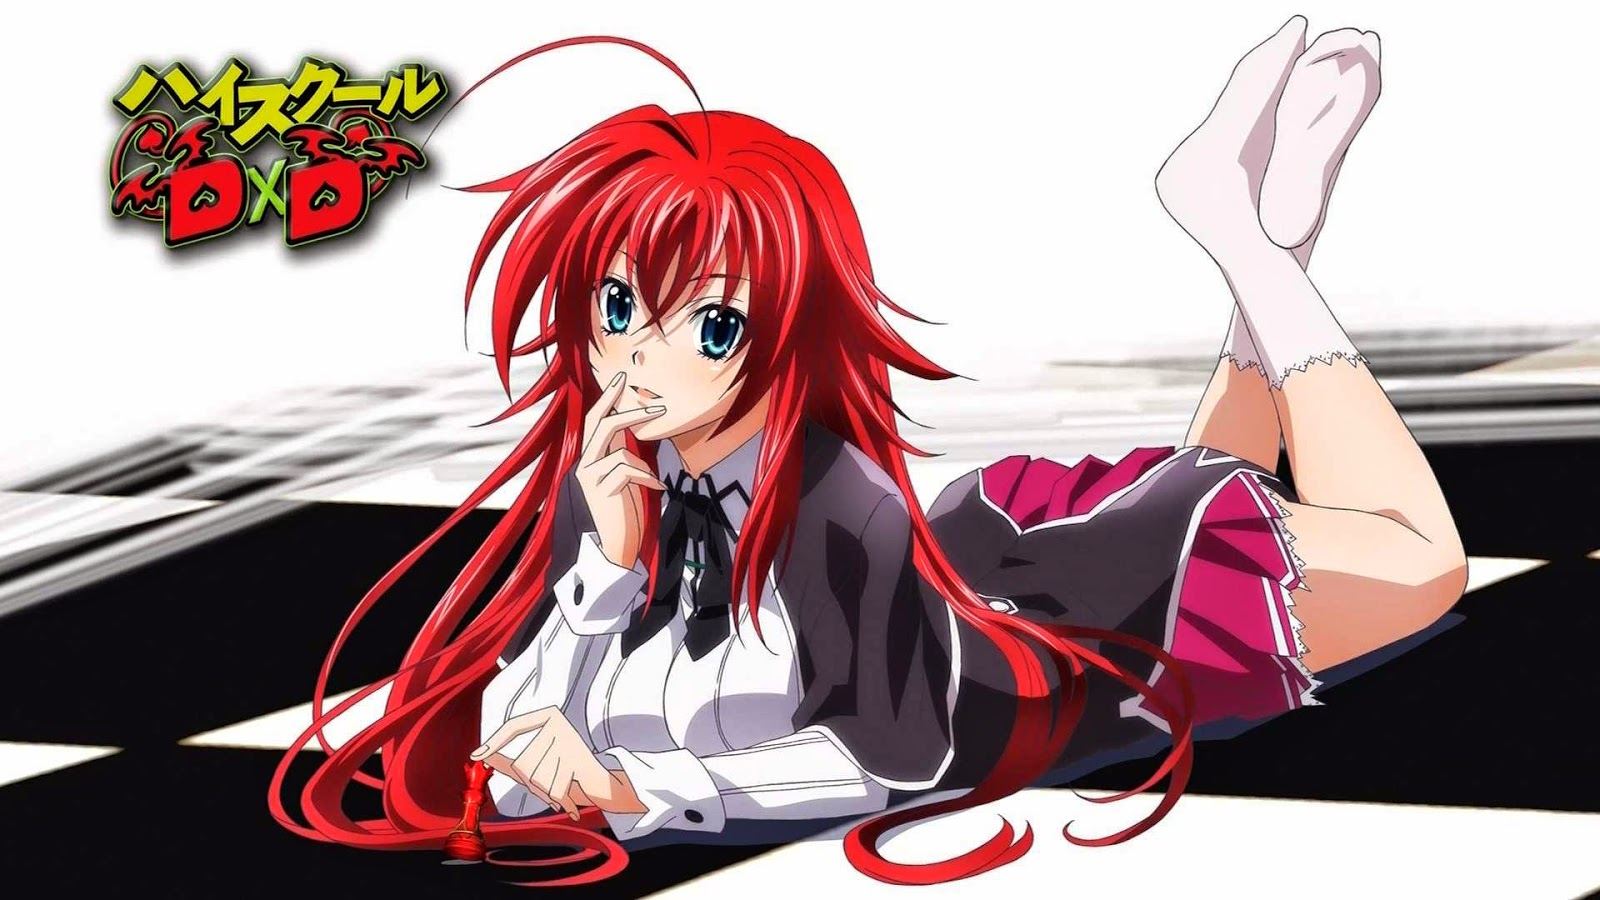 claudette malcolm recommends highschool dxd season 2 pic